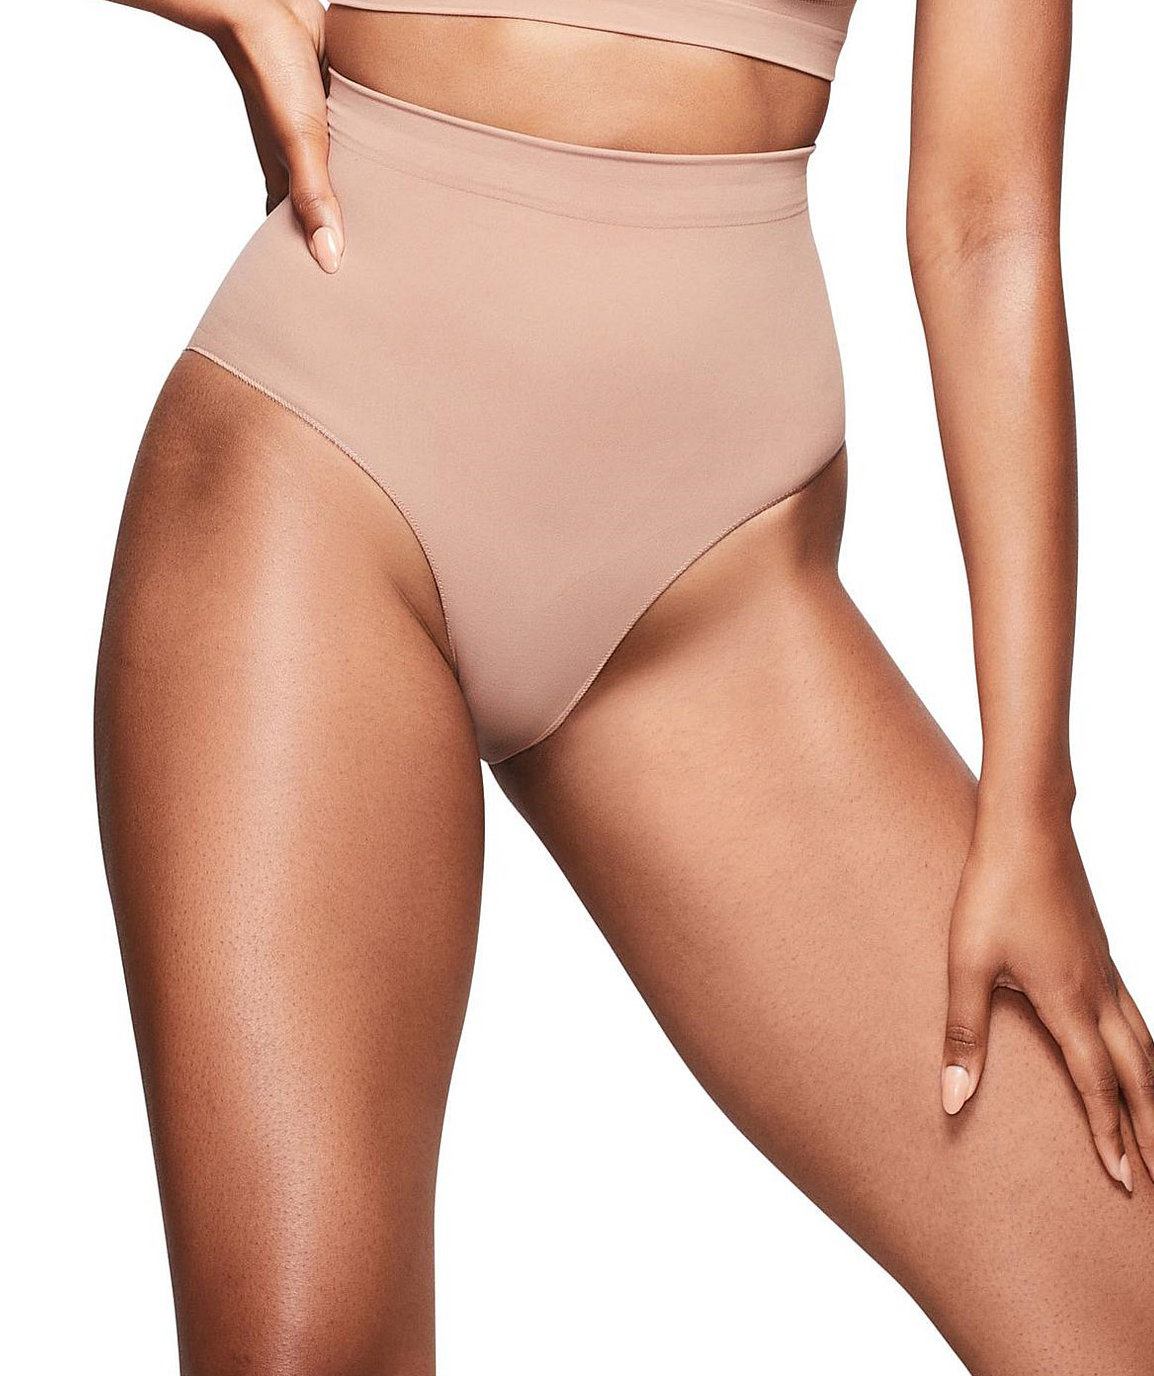 What is the best shapewear for a big tummy?